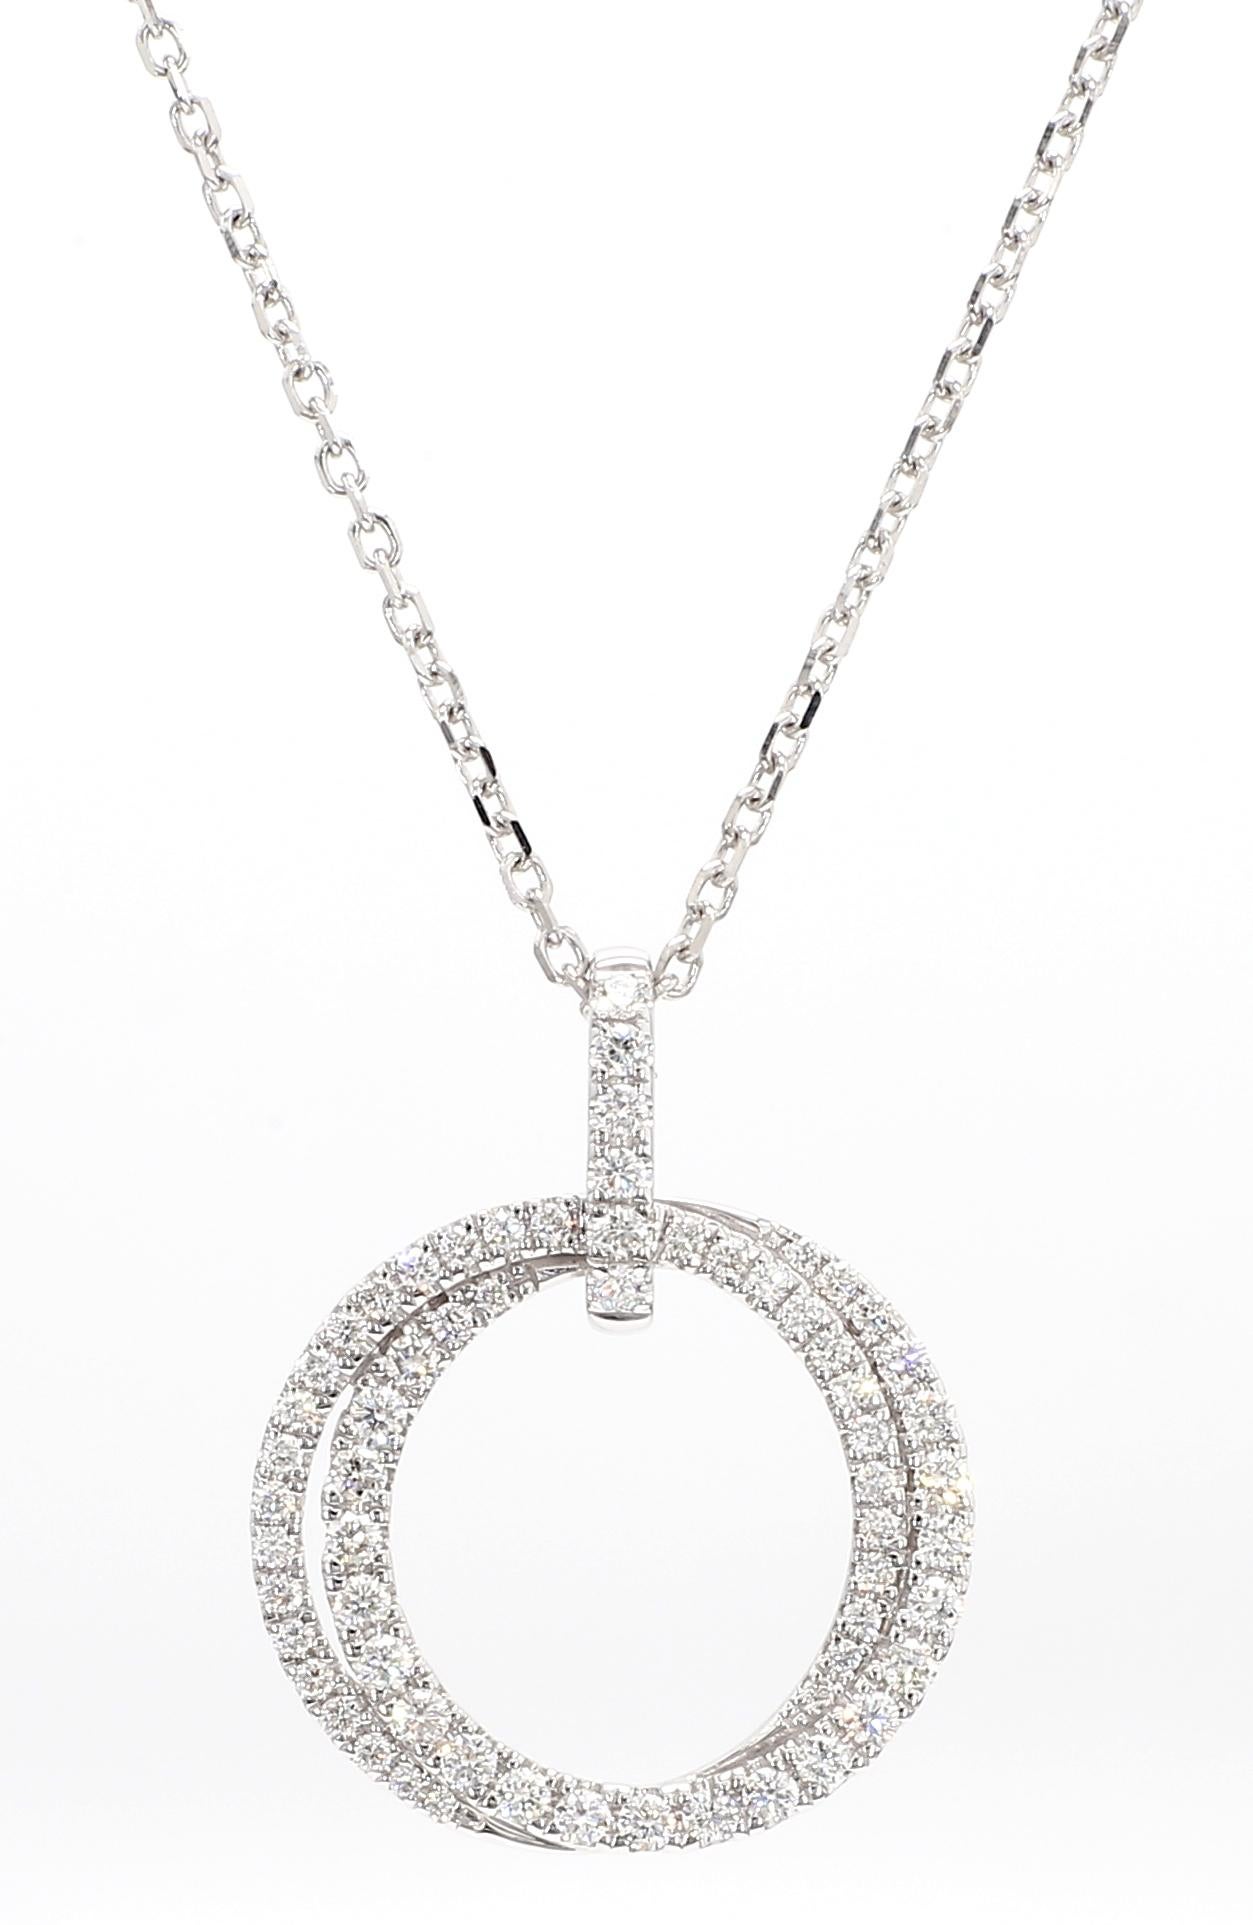 RareGemWorld's classic diamond pendant. Mounted in a beautiful 18K White Gold setting with natural round white diamond melee. This pendant is guaranteed to impress and enhance your personal collection.

Total Weight: 0.63cts

Length x Width: 24.4 x